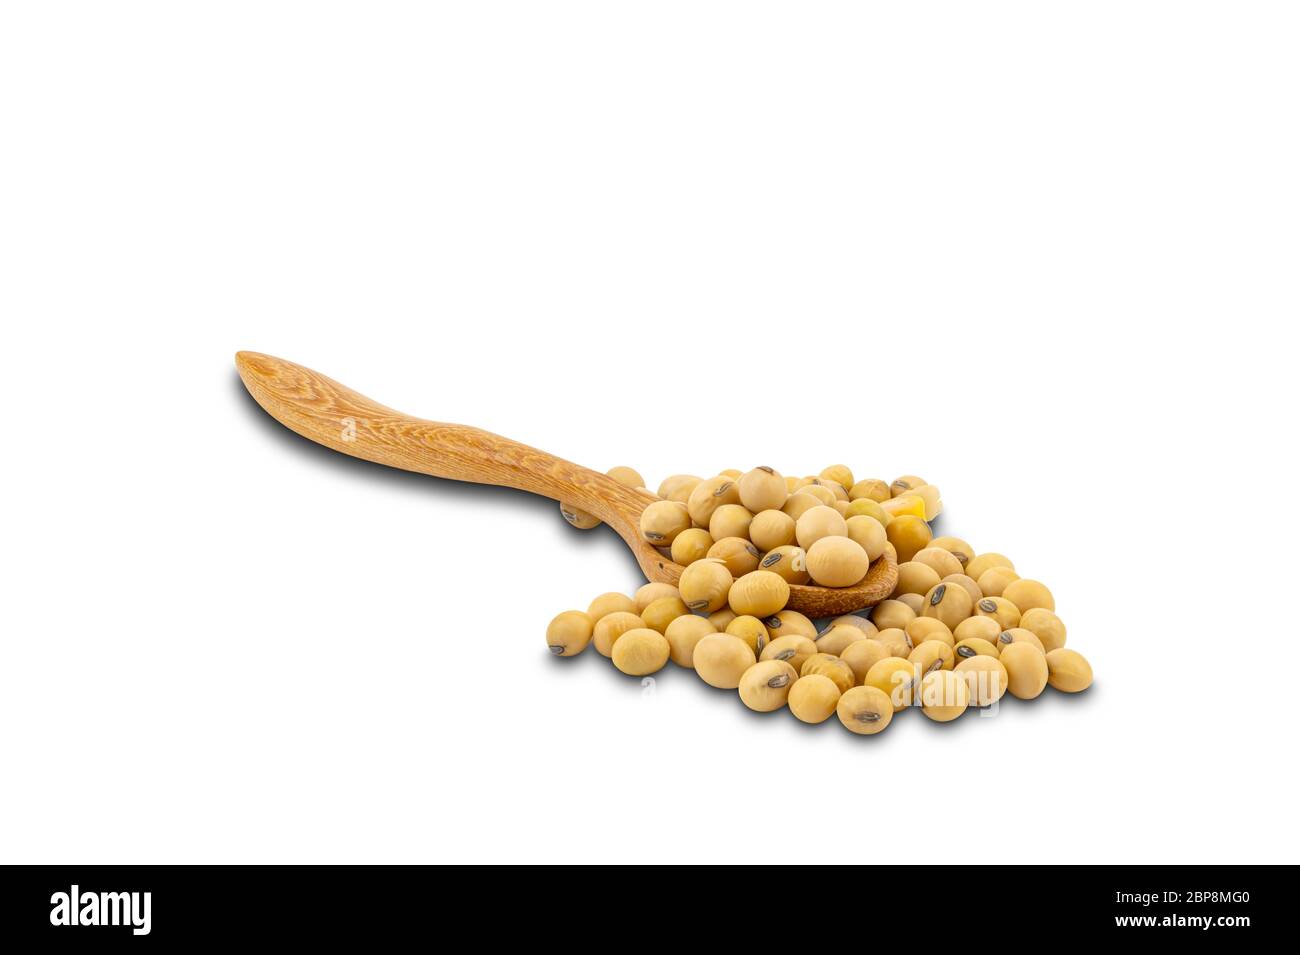 Soy beans in wooden spoon on white background with clipping path. Soy bean is important bean that provide vegetable protein for people. Stock Photo